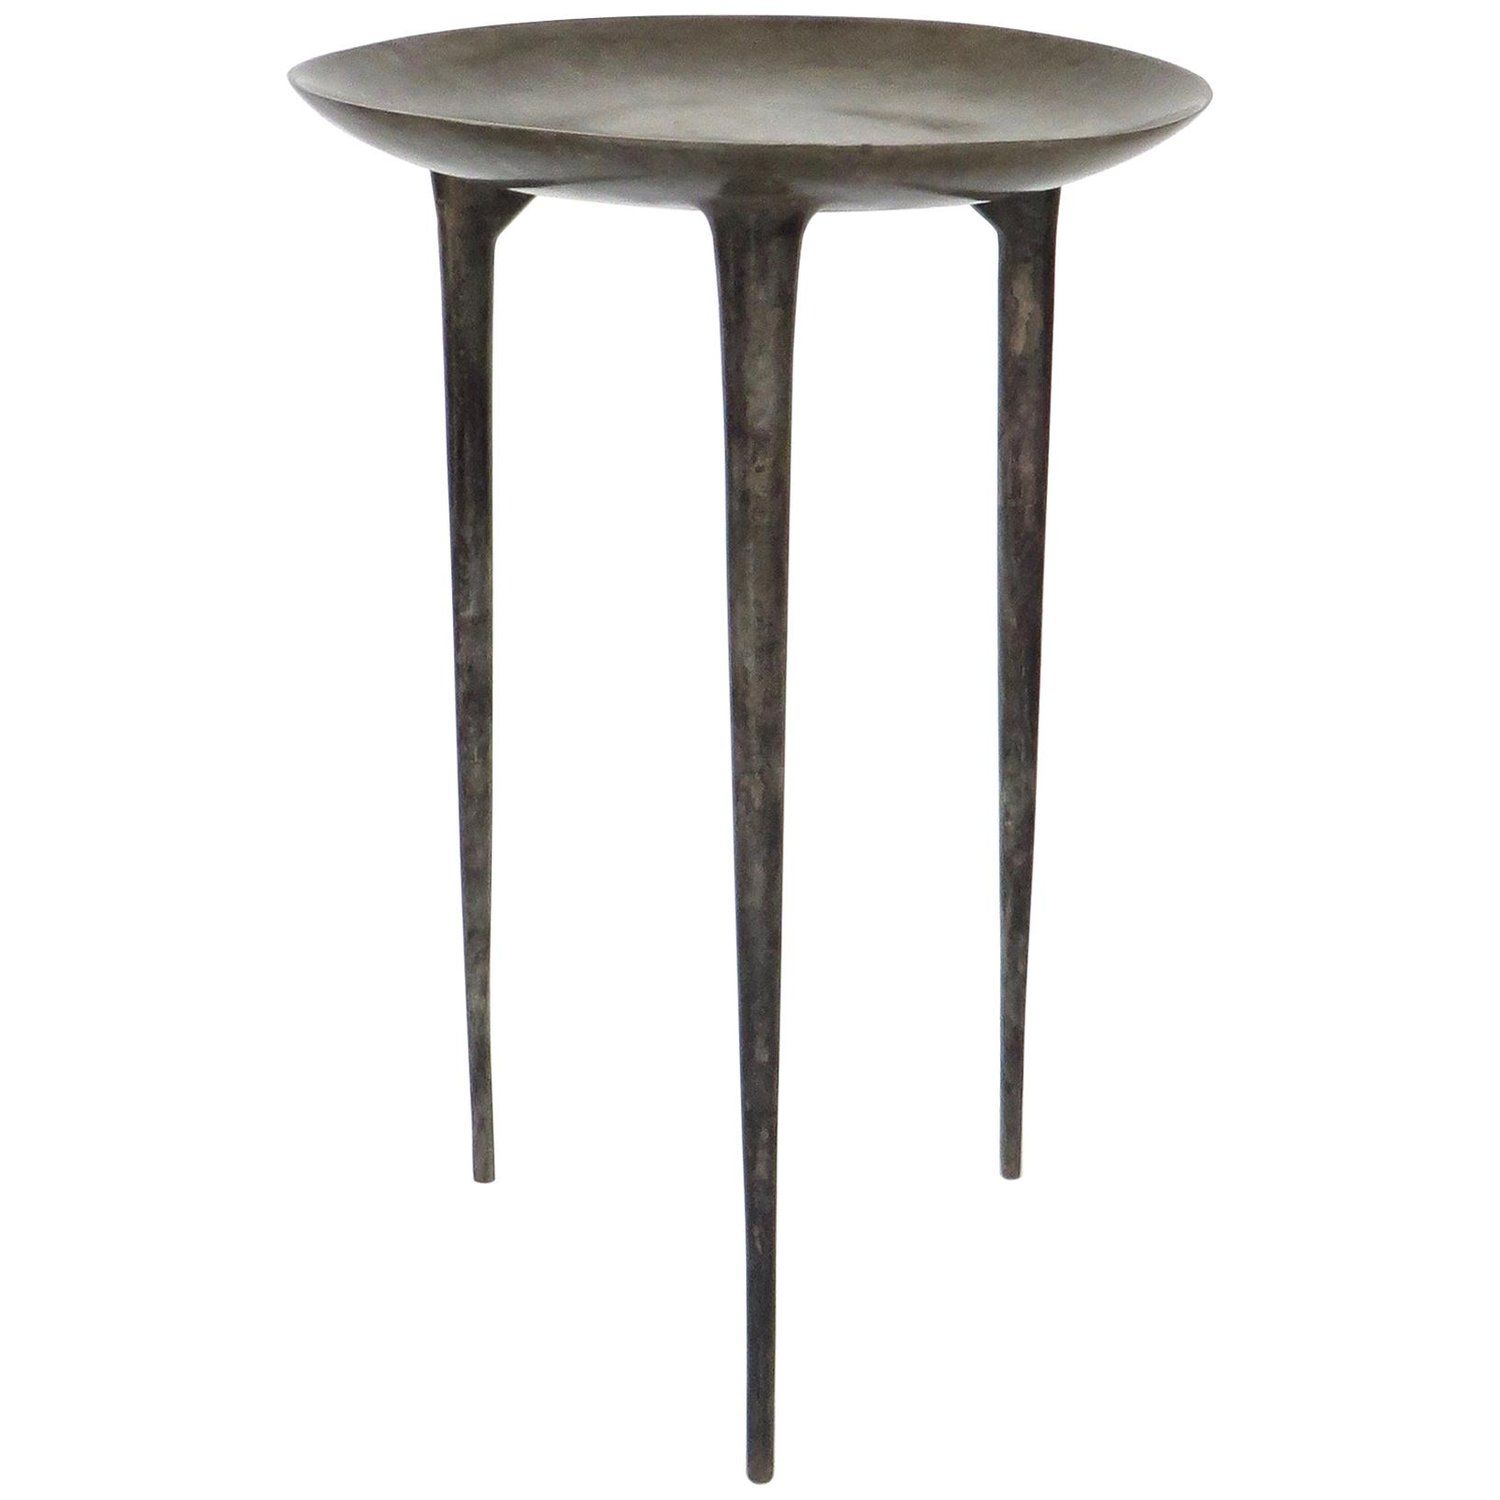 french brazier cast bronze tall side table rick owens accent pedestal pier dining used drum throne oval marble target end tables and coffee distressed wood lamps plus shabby chic